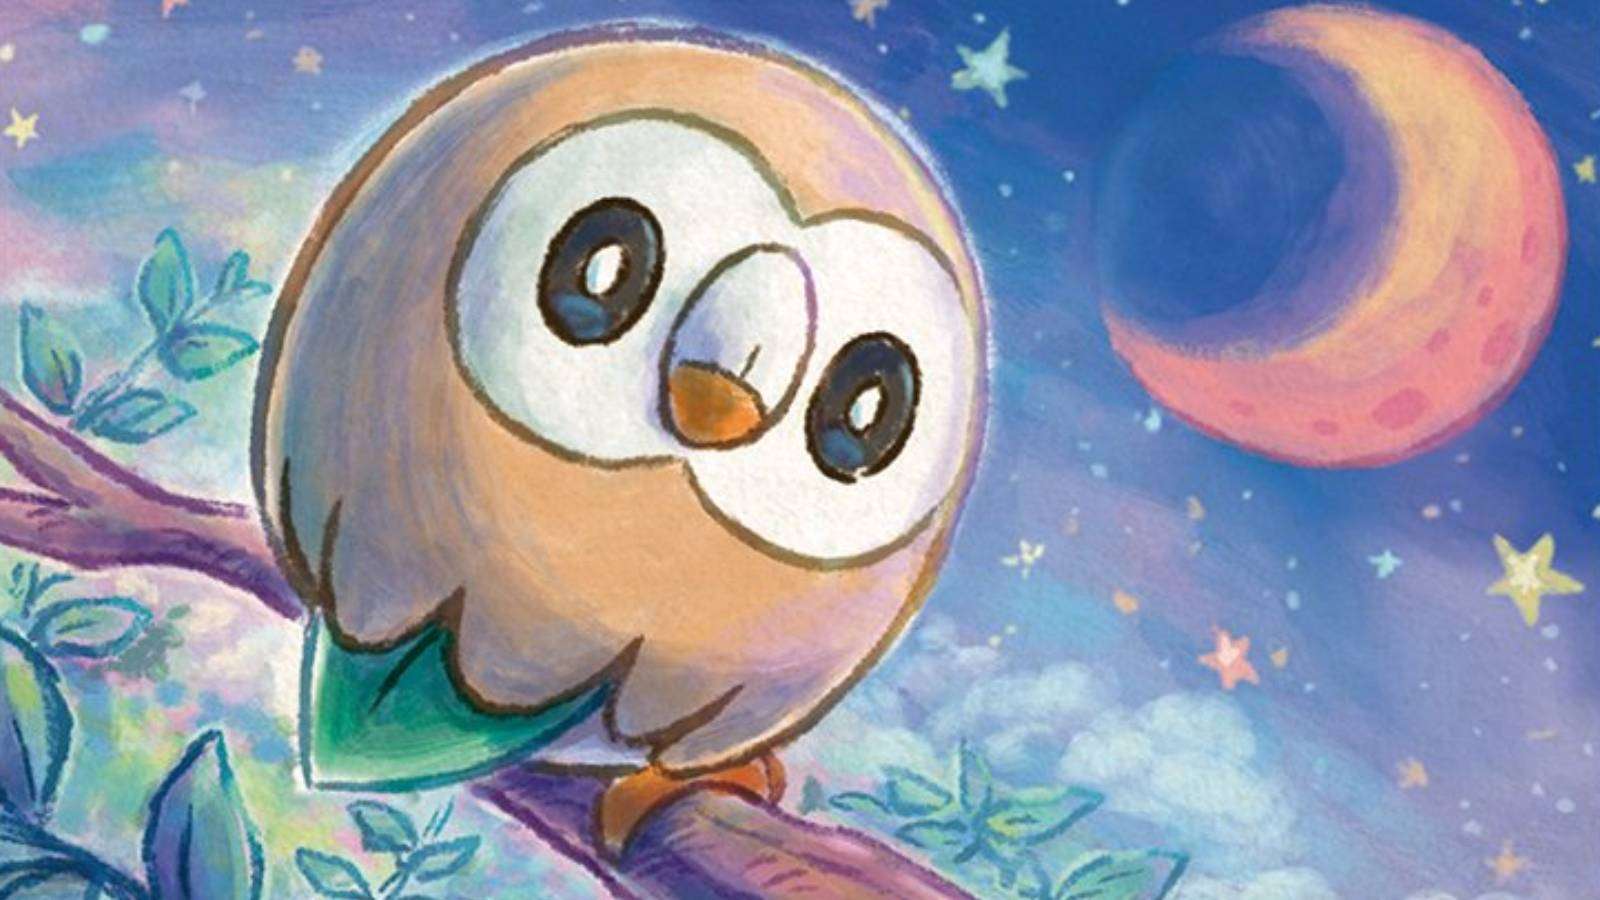 An illustrated picture shows Rowlet sitting on a branch at night